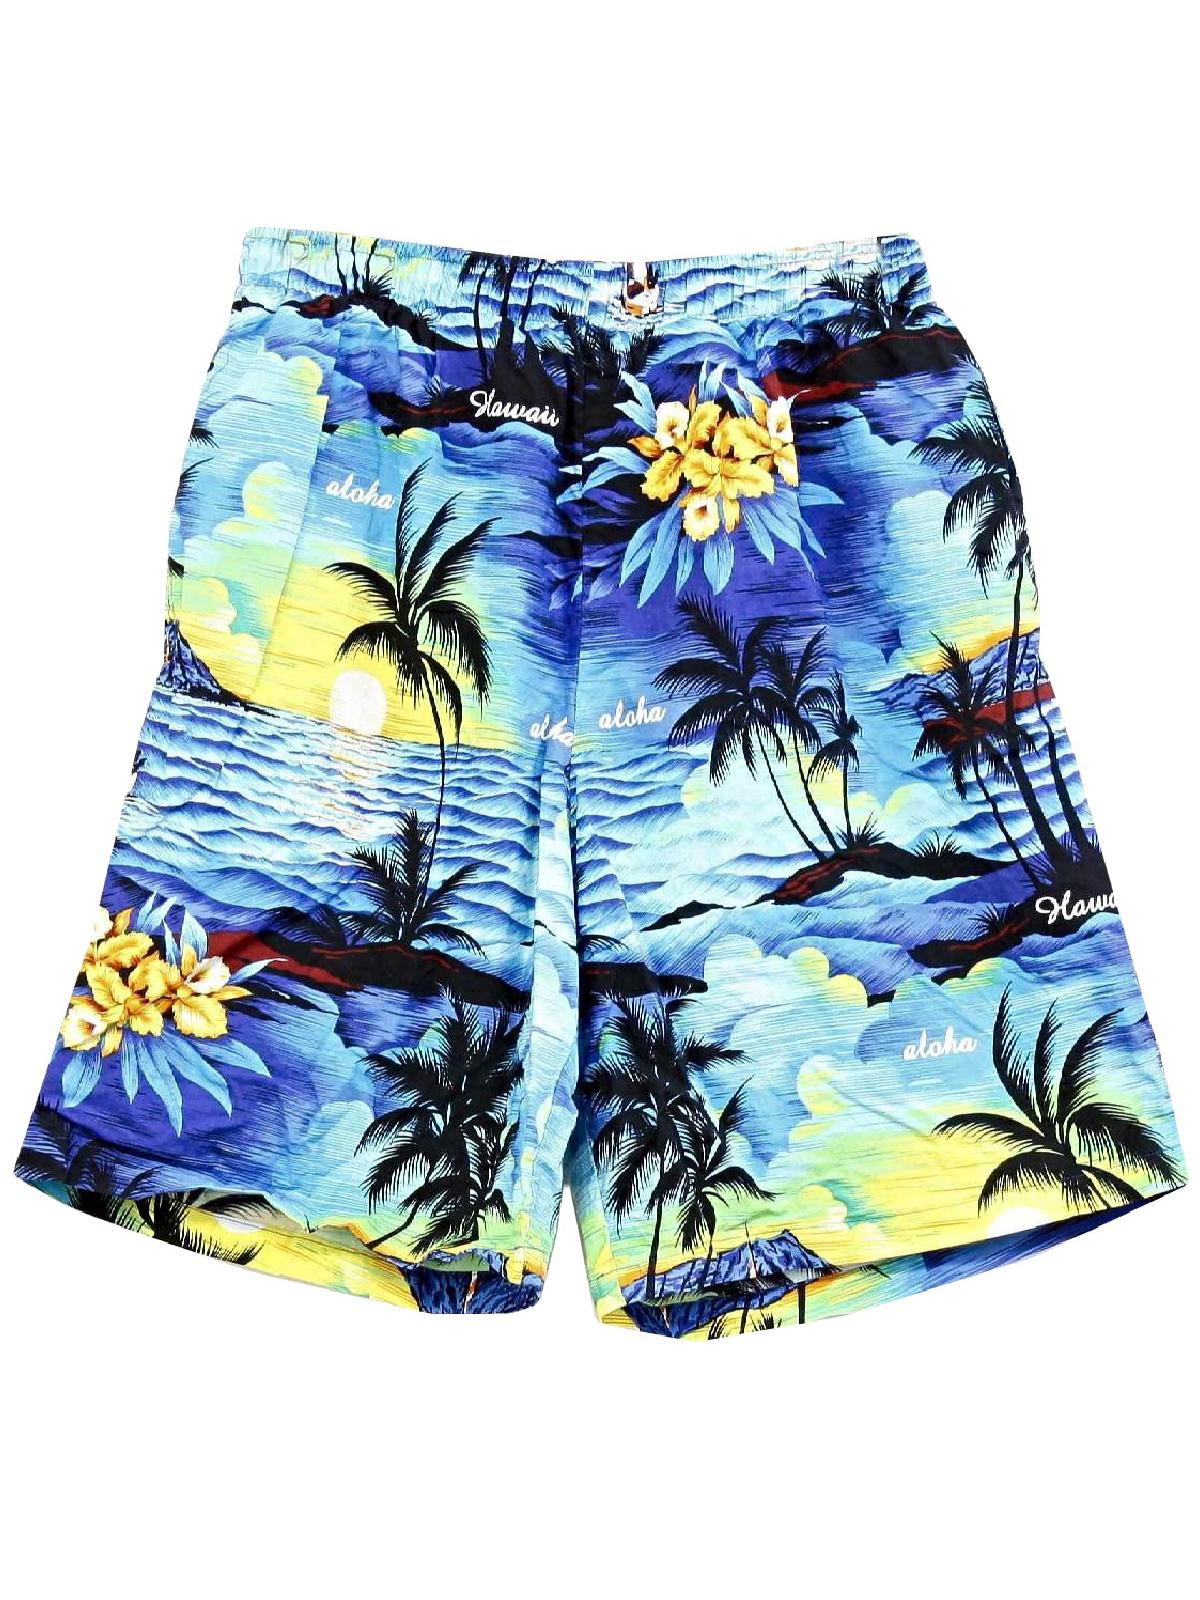 1990's Retro Shorts: 90s -Missing Label- Mens blue background with ...